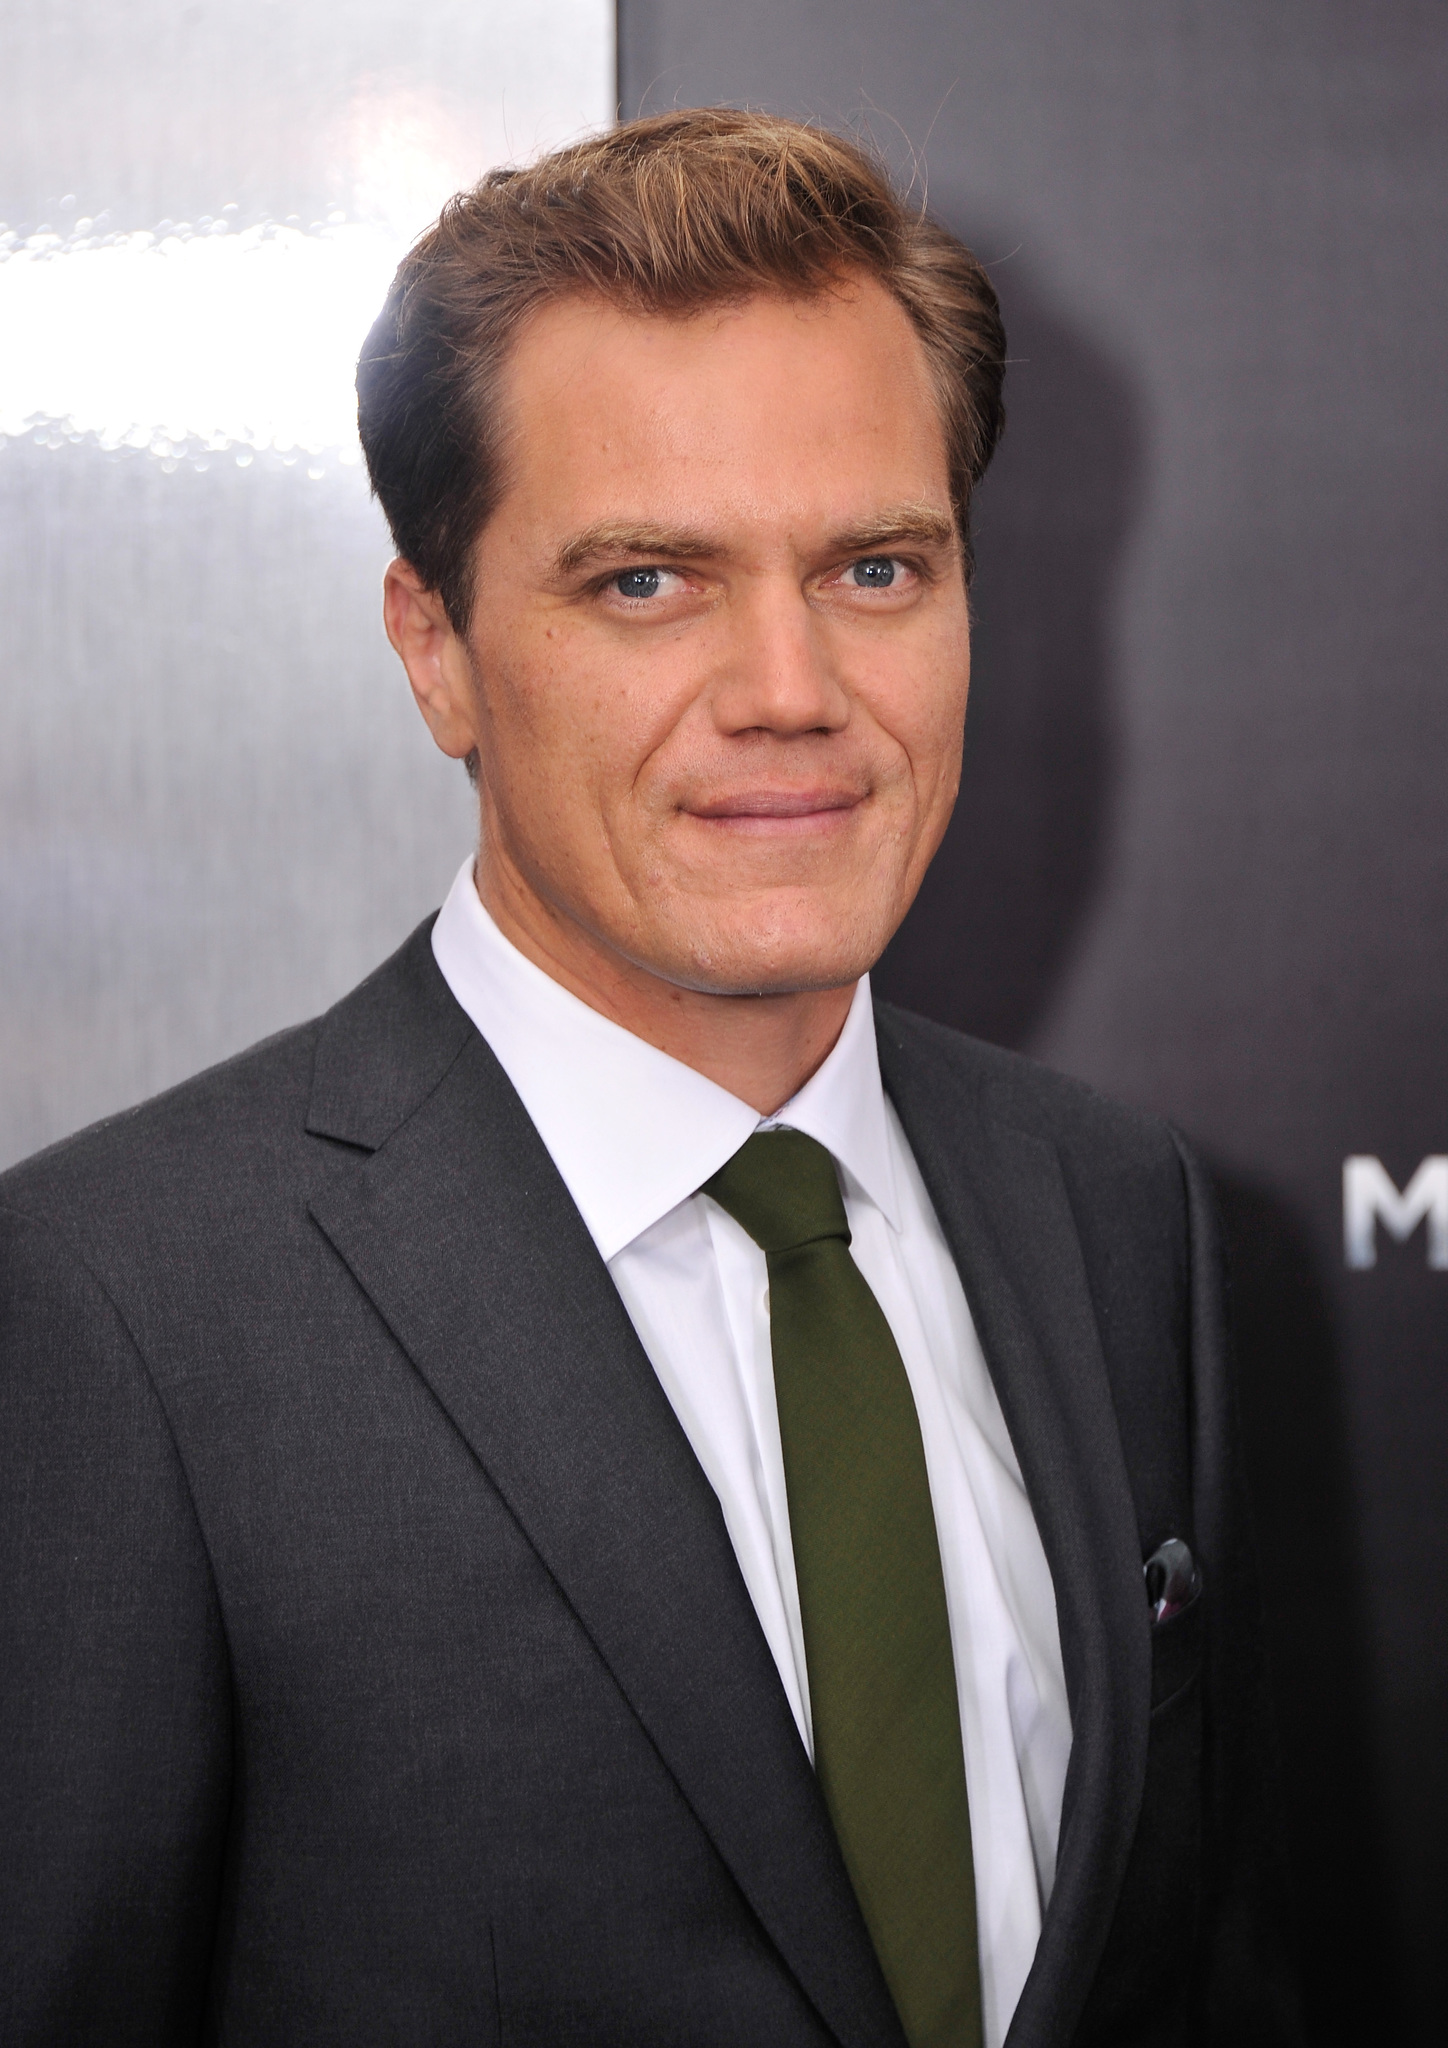 Michael Shannon at event of Zmogus is plieno (2013)